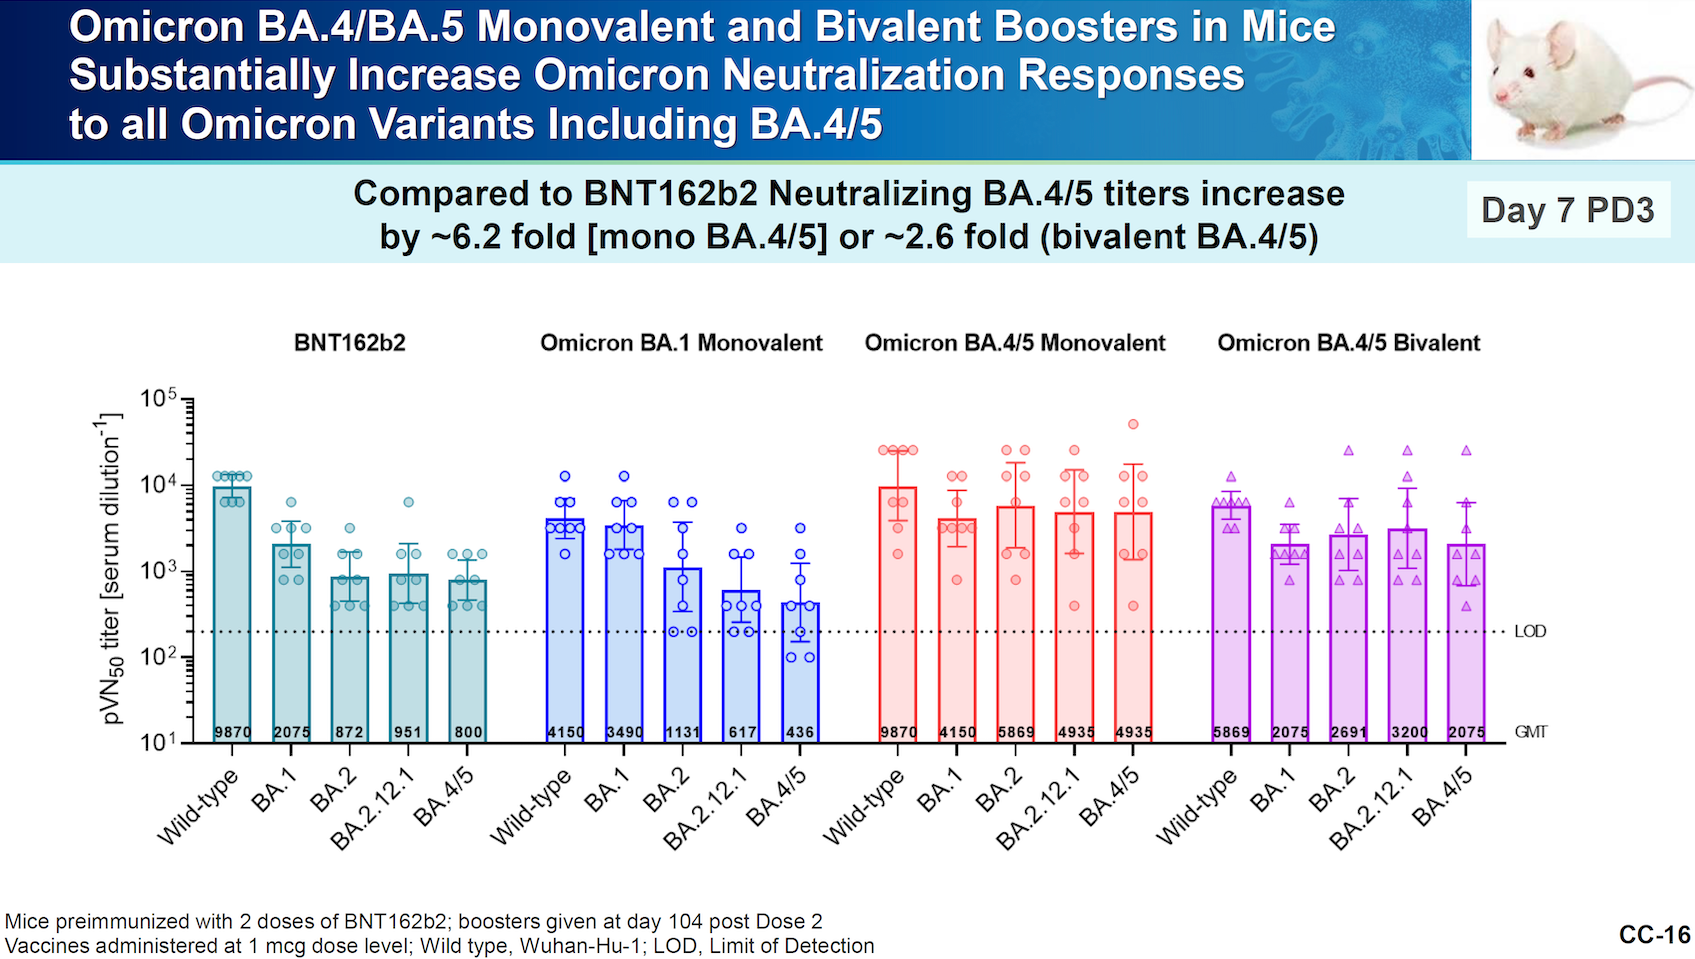 Omicron BA.4/BA.5 Monobalent and Bivalent Boosters in Mice (Courtesy of Centers for Disease and Prevention) 